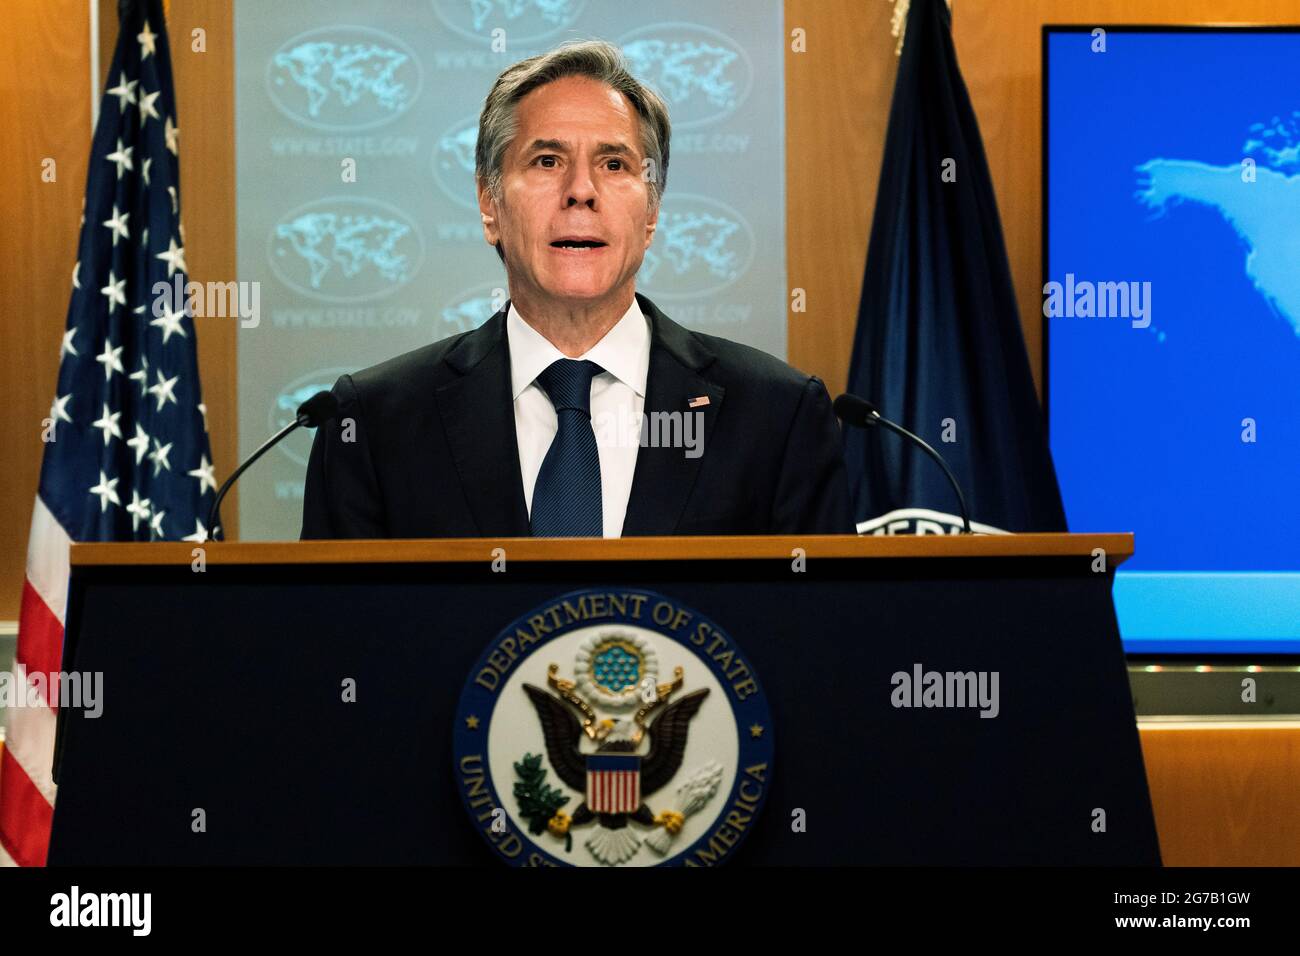 U.S. Secretary of State Antony Blinken speaks about the release of the 2021 Congressional Report Pursuant to the Elie Wiesel Genocide and Atrocities Prevention Act at the Department of State in Washington, U.S., July 12, 2021. Manuel Balce Ceneta/Pool via REUTERS Stock Photo